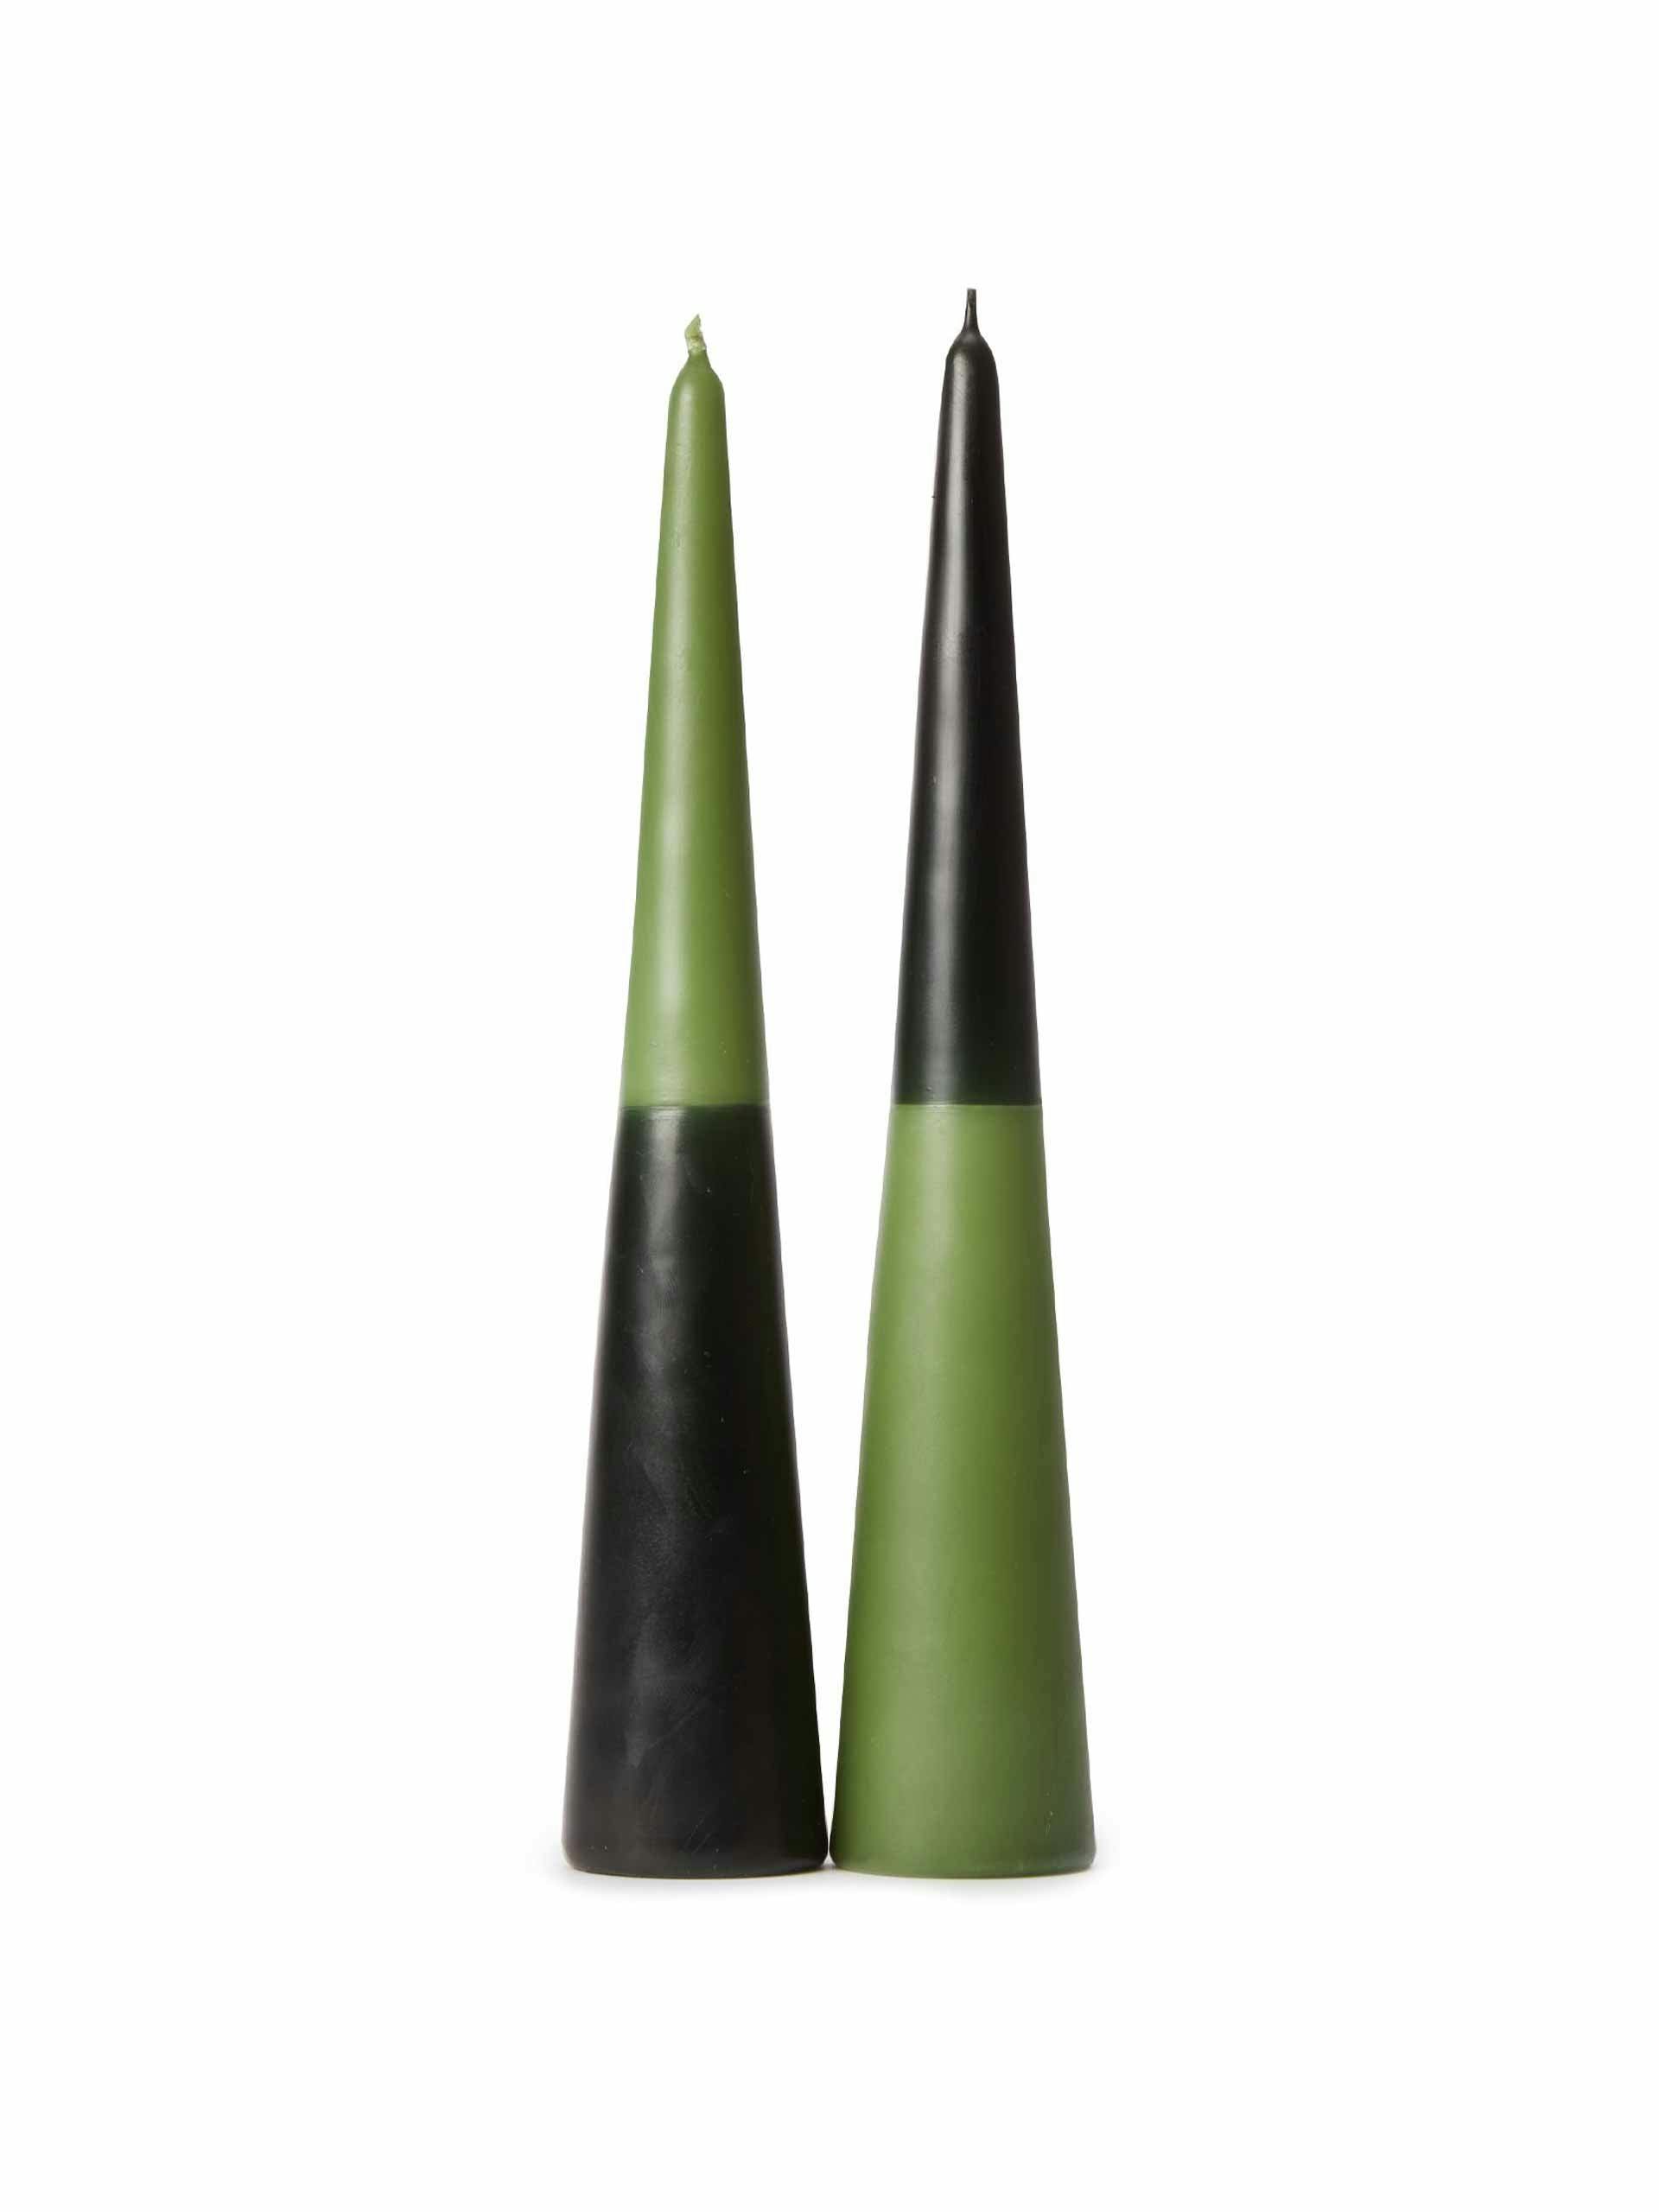 Tapered candles (set of two)